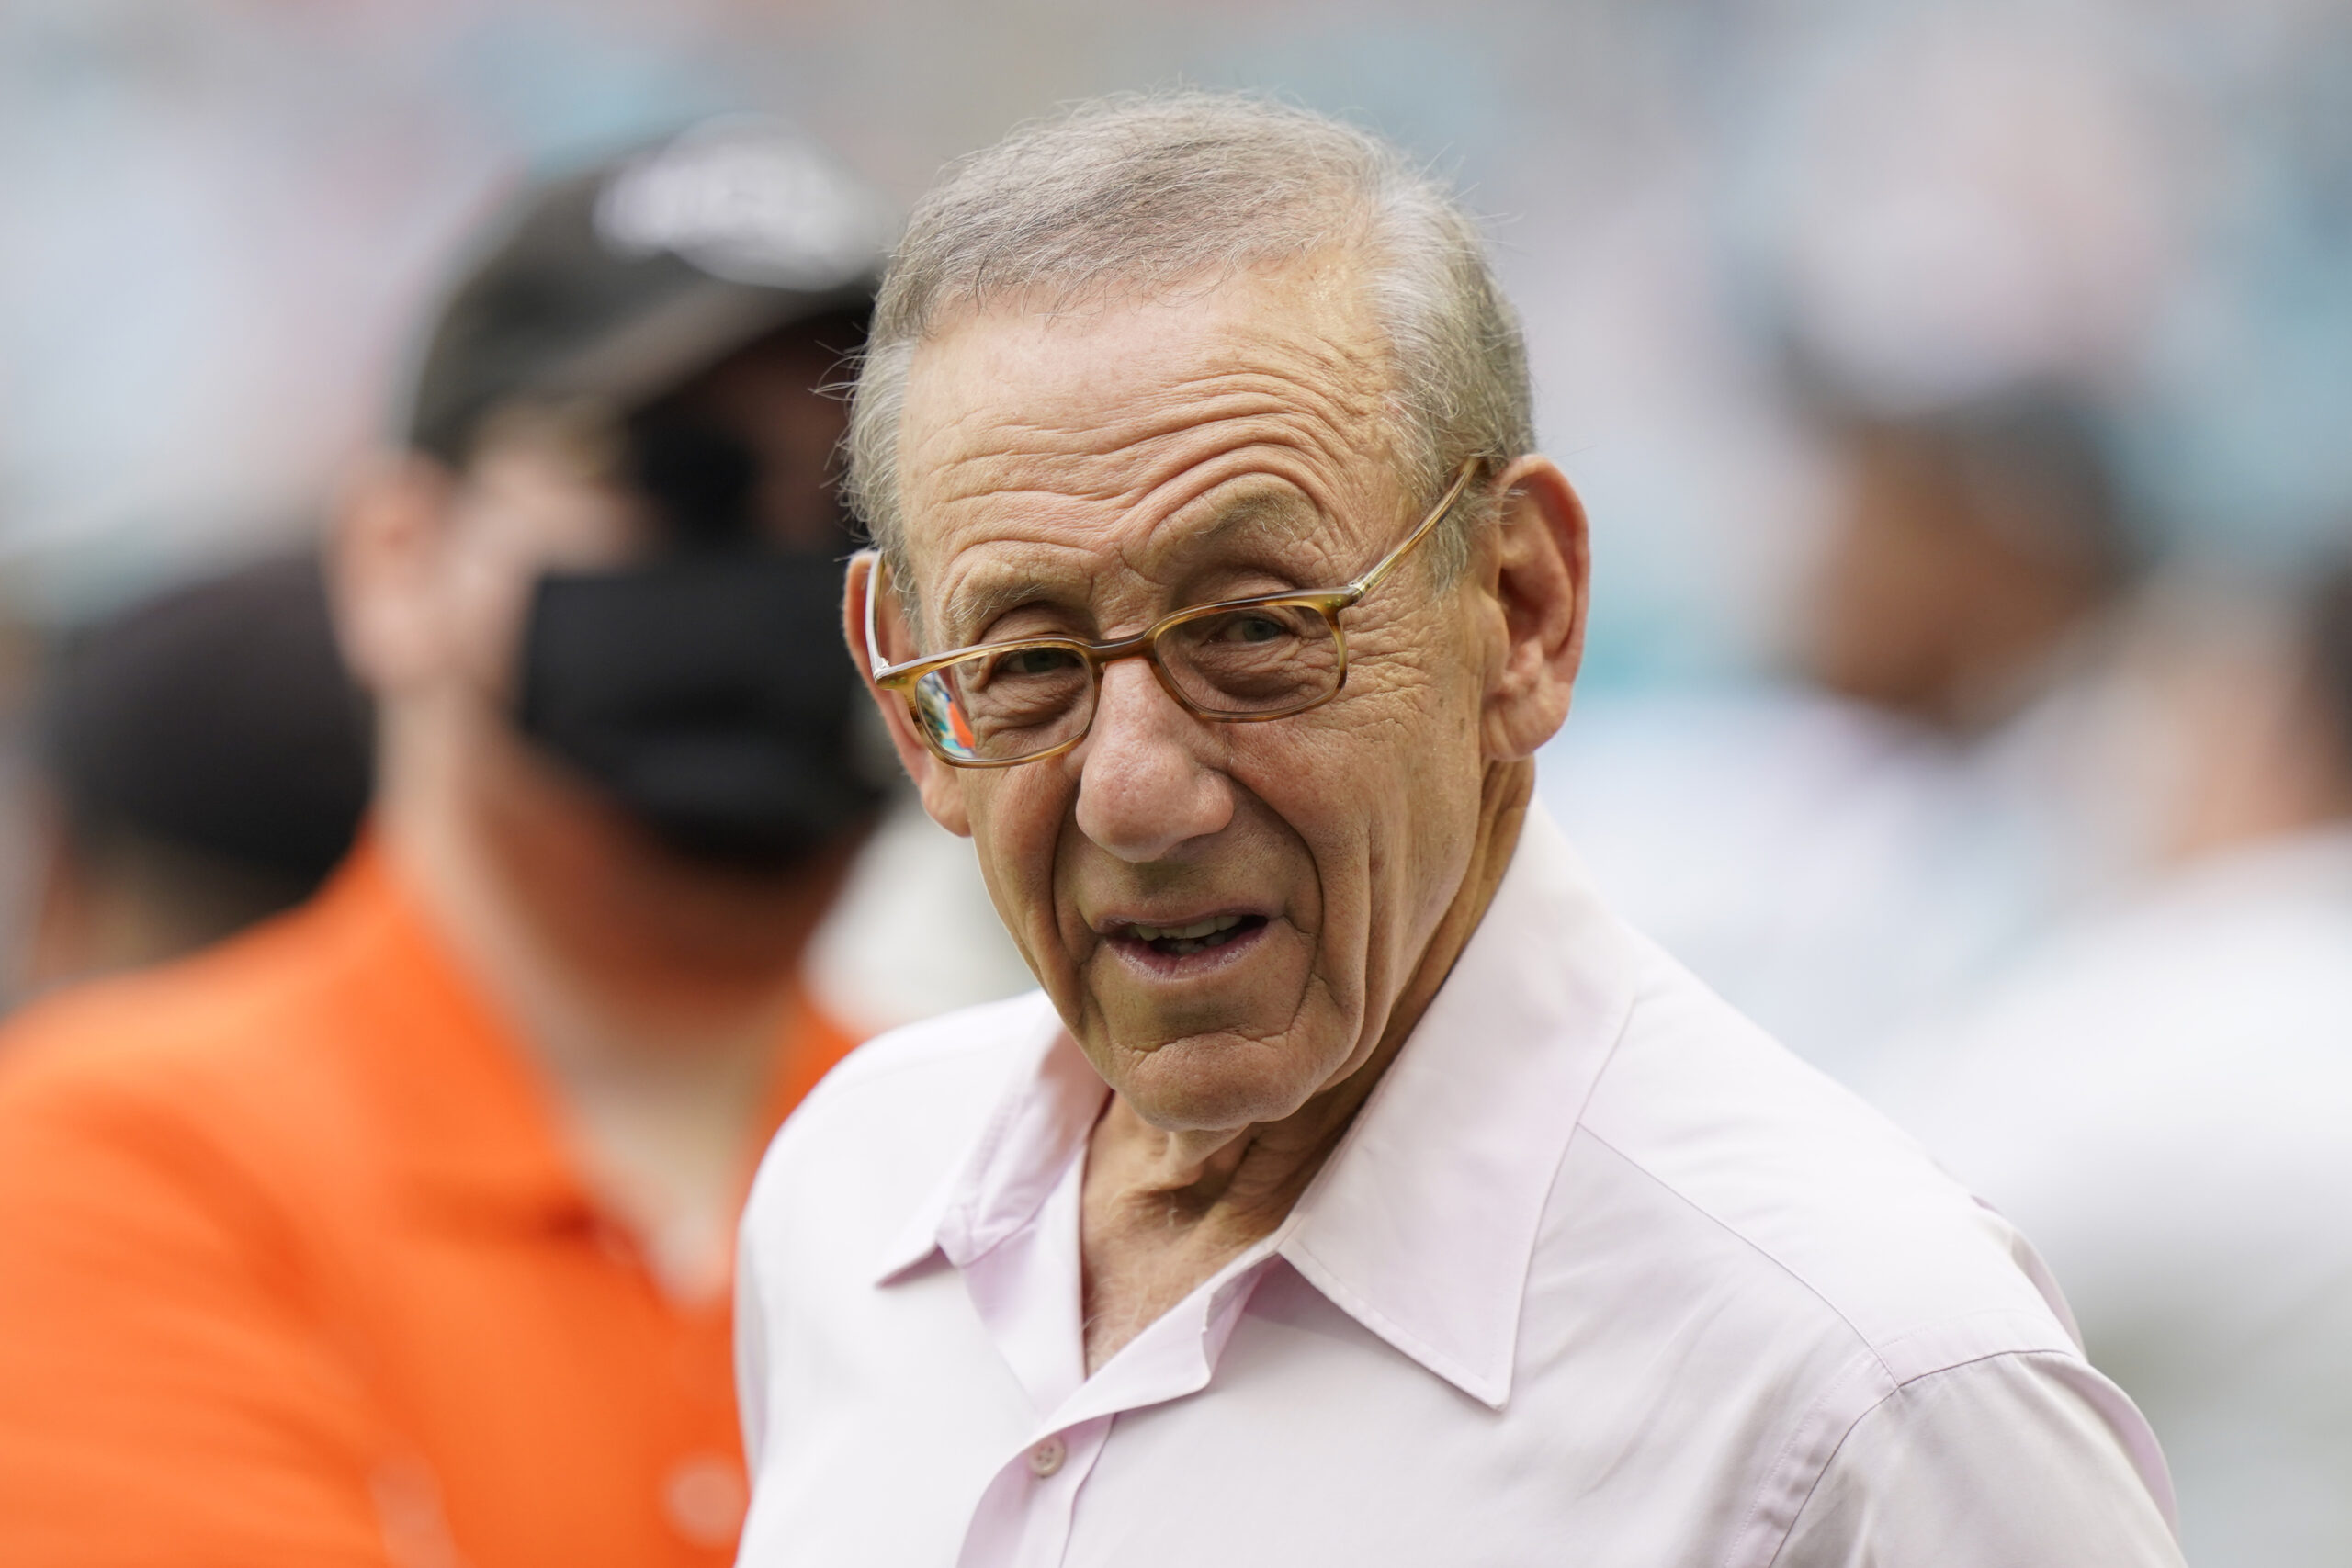 FILE - Miami Dolphins owner Stephen Ross gestures at the end of an NFL football game against the Atlanta Falcons, on Oct. 24, 2021, in Miami Gardens, Fla. The NFL has suspended Miami Dolphins owner Stephen Ross and fined him $1.5 million for tampering with Tom Brady and Sean Payton following a six-month investigation stemming from Brian Flores' racial discrimination lawsuit against the league. (AP Photo/Wilfredo Lee, FIle)